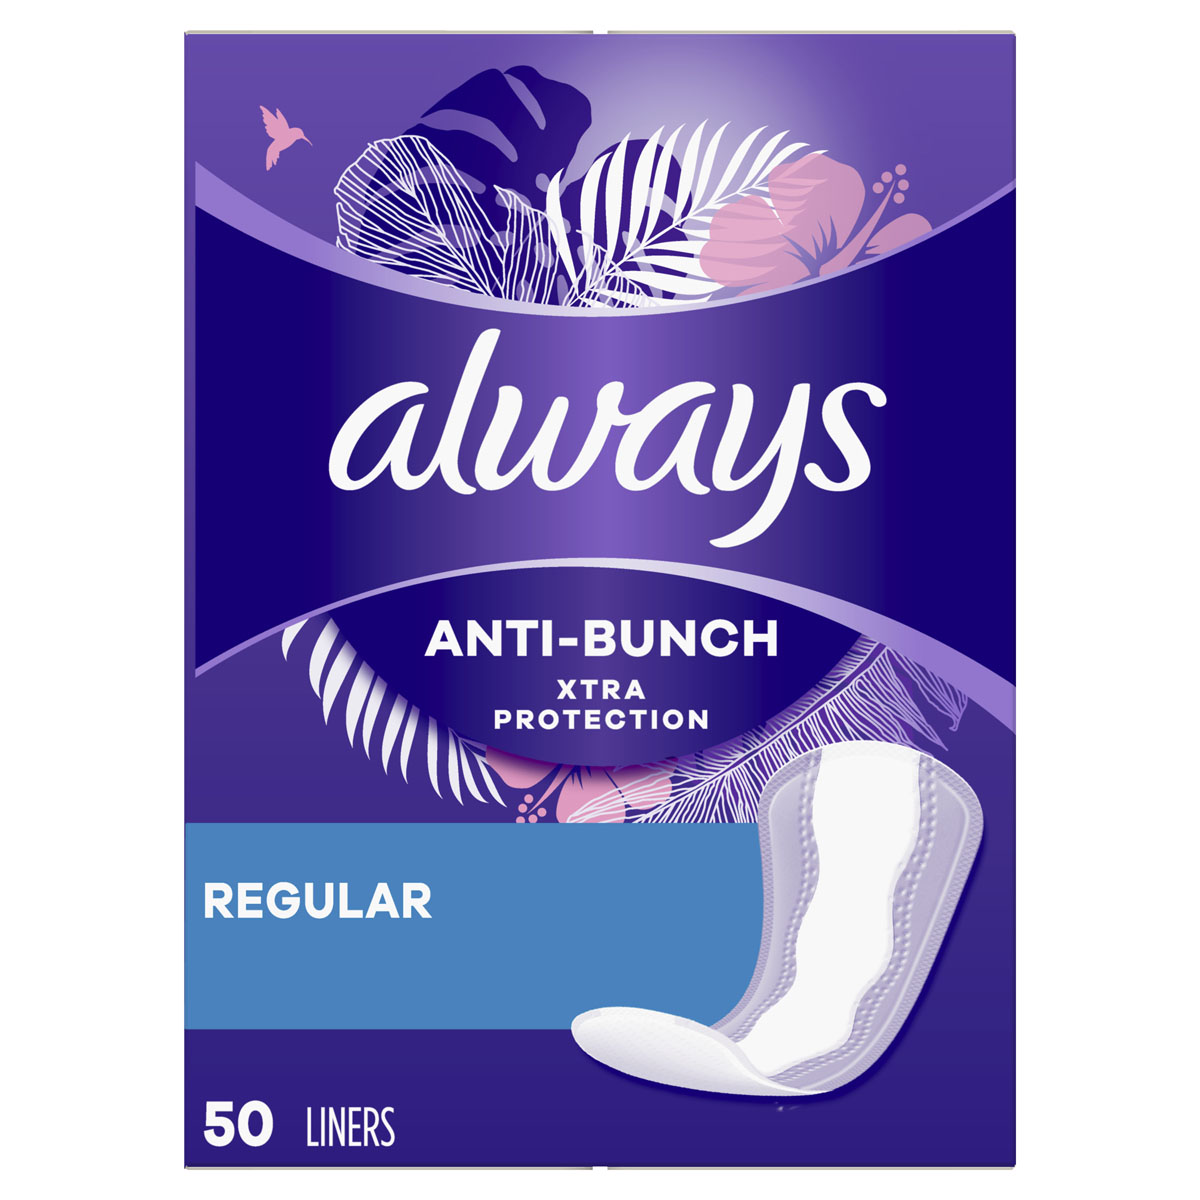 Product-Always Xtra Protection Daily Liners, Regular